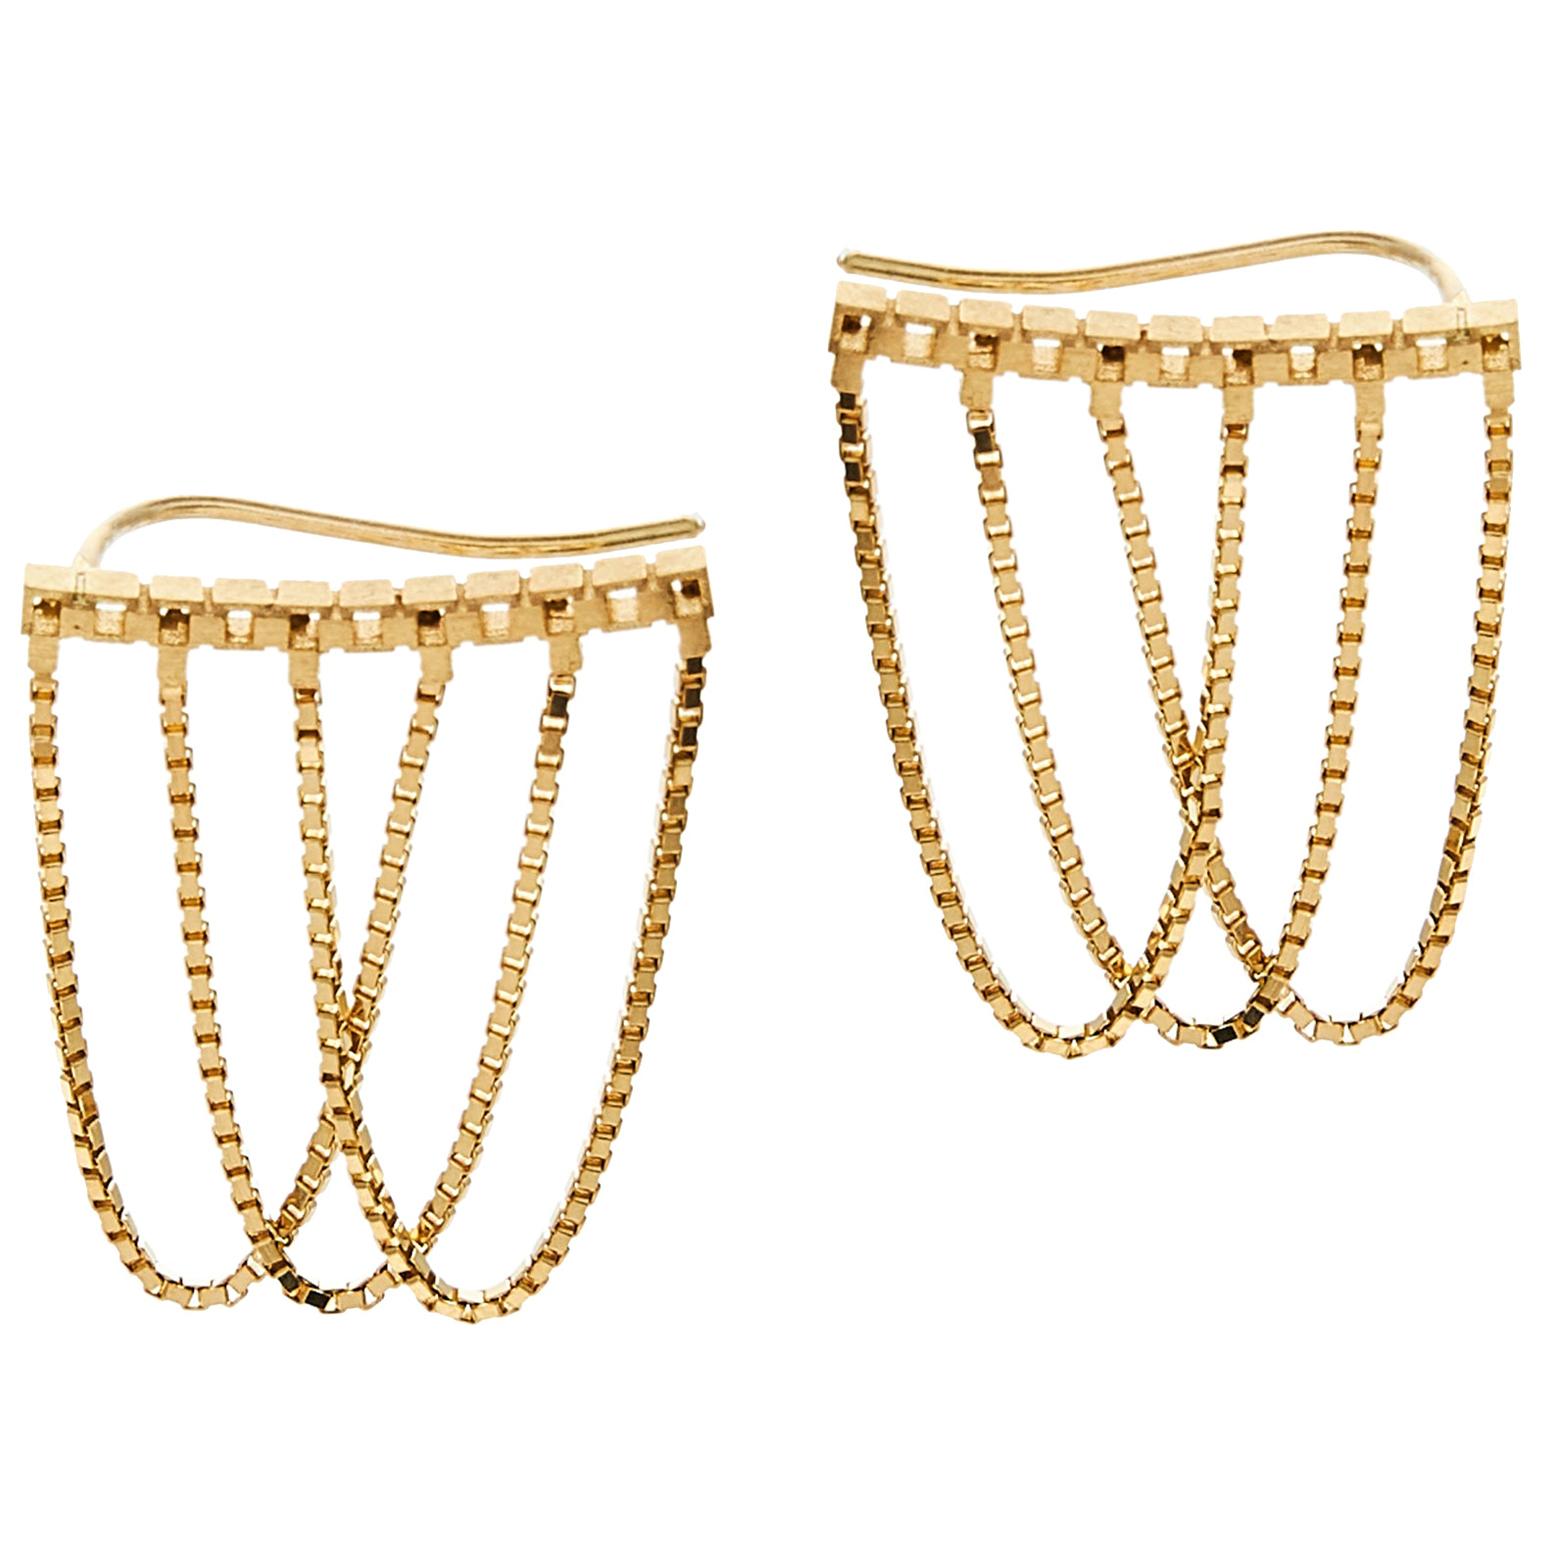 Earrings Short Studs Box Chain Currents 18K Gold-Plated Silver Greek Earrings For Sale